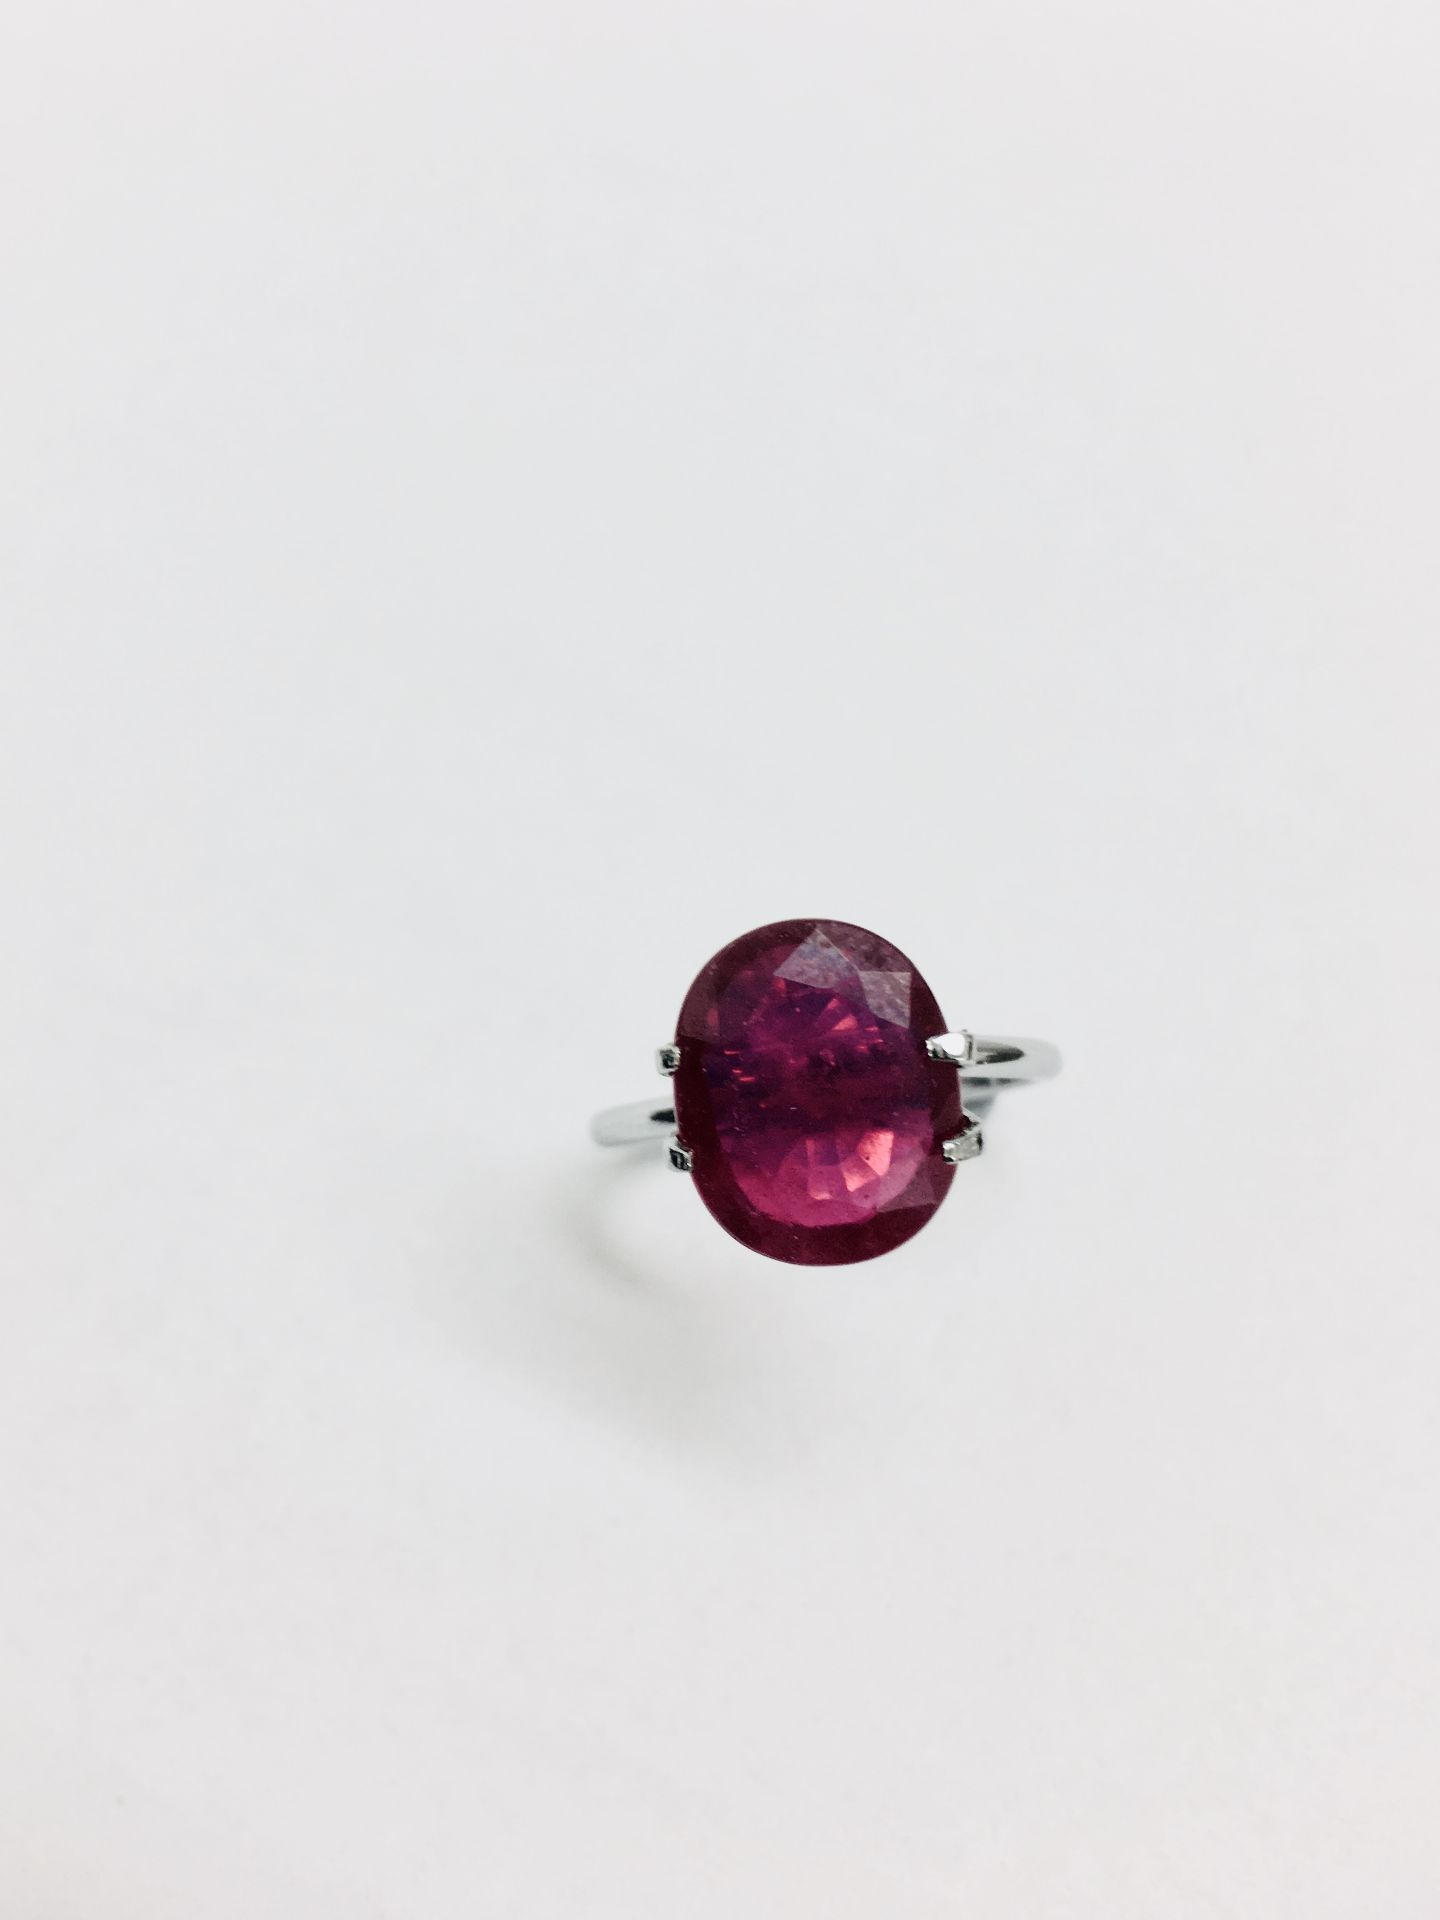 5.02ct ruby,Enhanced by Frature,good clarity and colour,12mmx10mm ,valued at 800 - Image 3 of 3